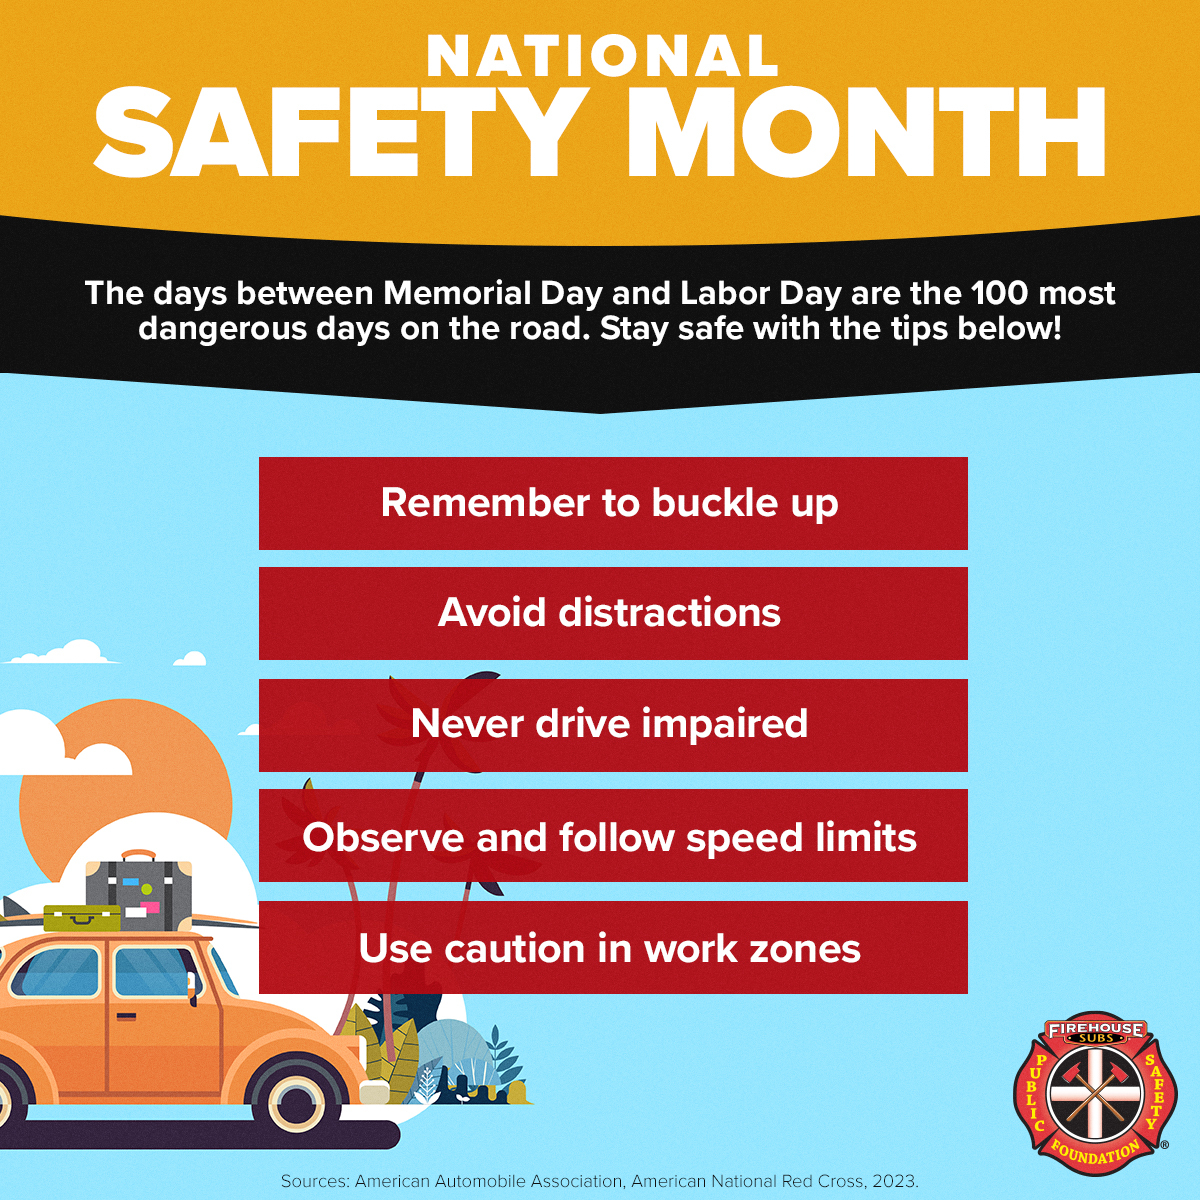 June is National Safety Month! With summer rolling in and more drivers hitting the road, make safety a top priority. Keep these tips in mind to ensure you and your loved ones have a safe and enjoyable time on the road. 🚗